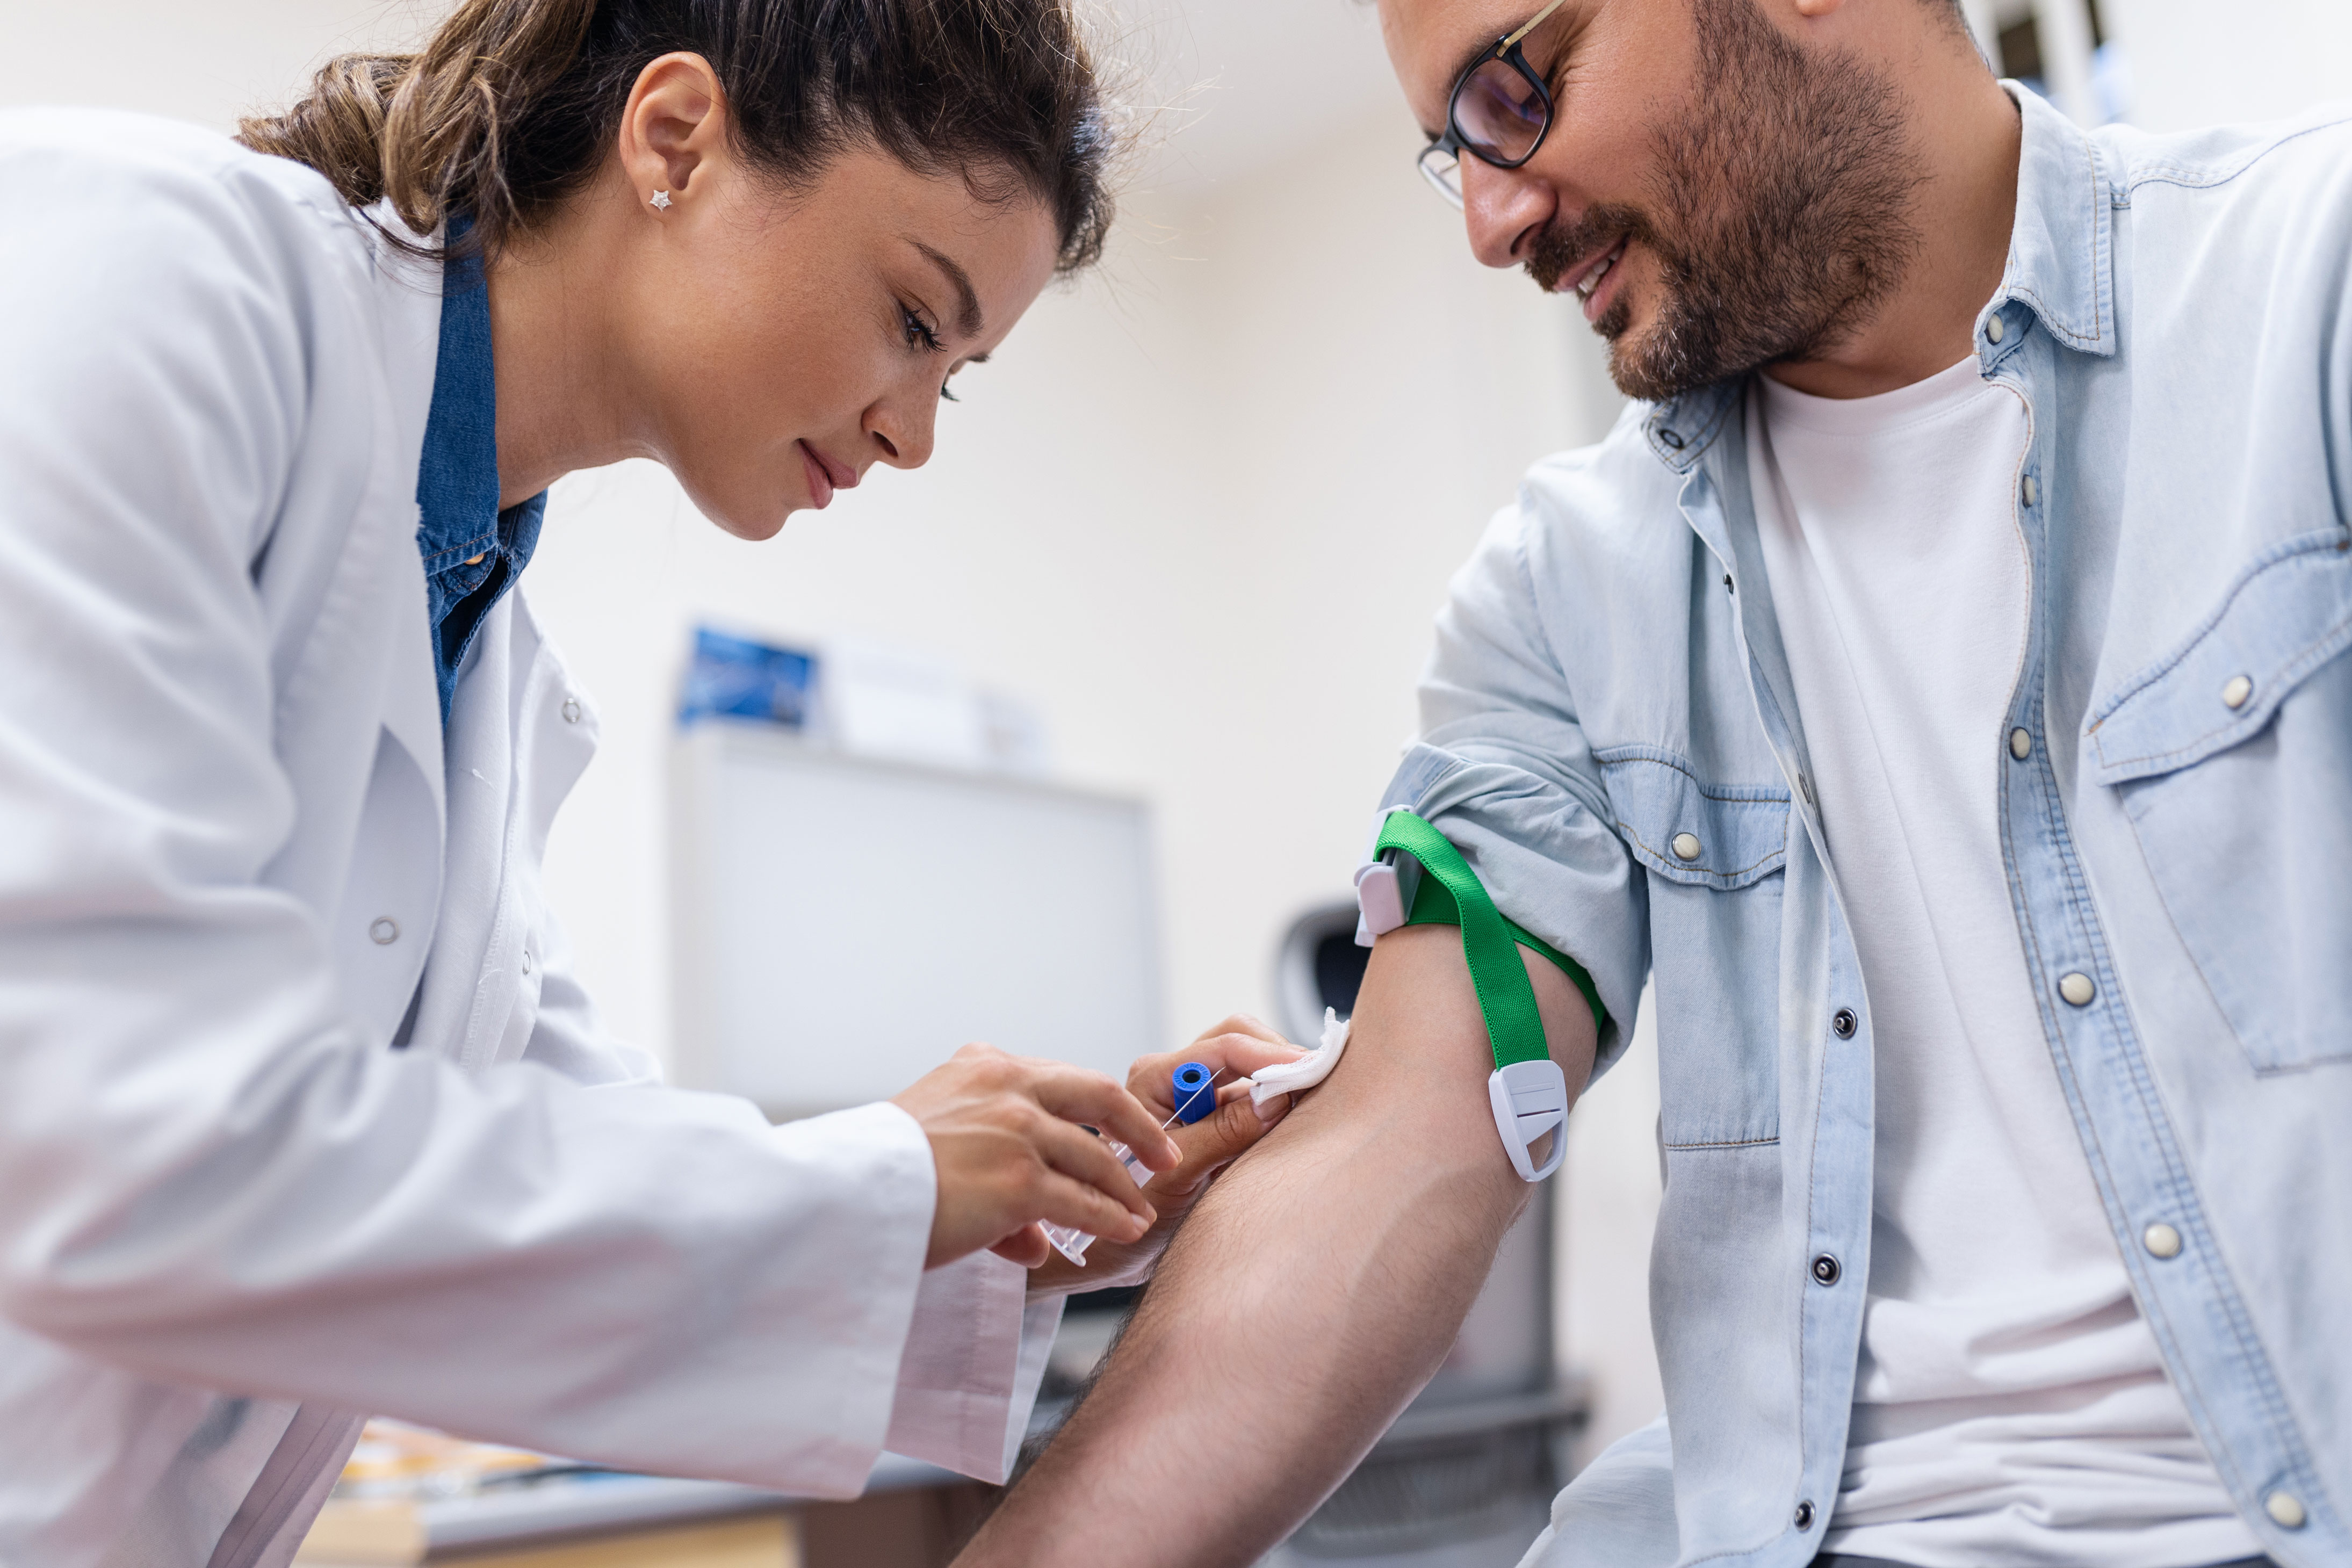 How to Hire Phlebotomists